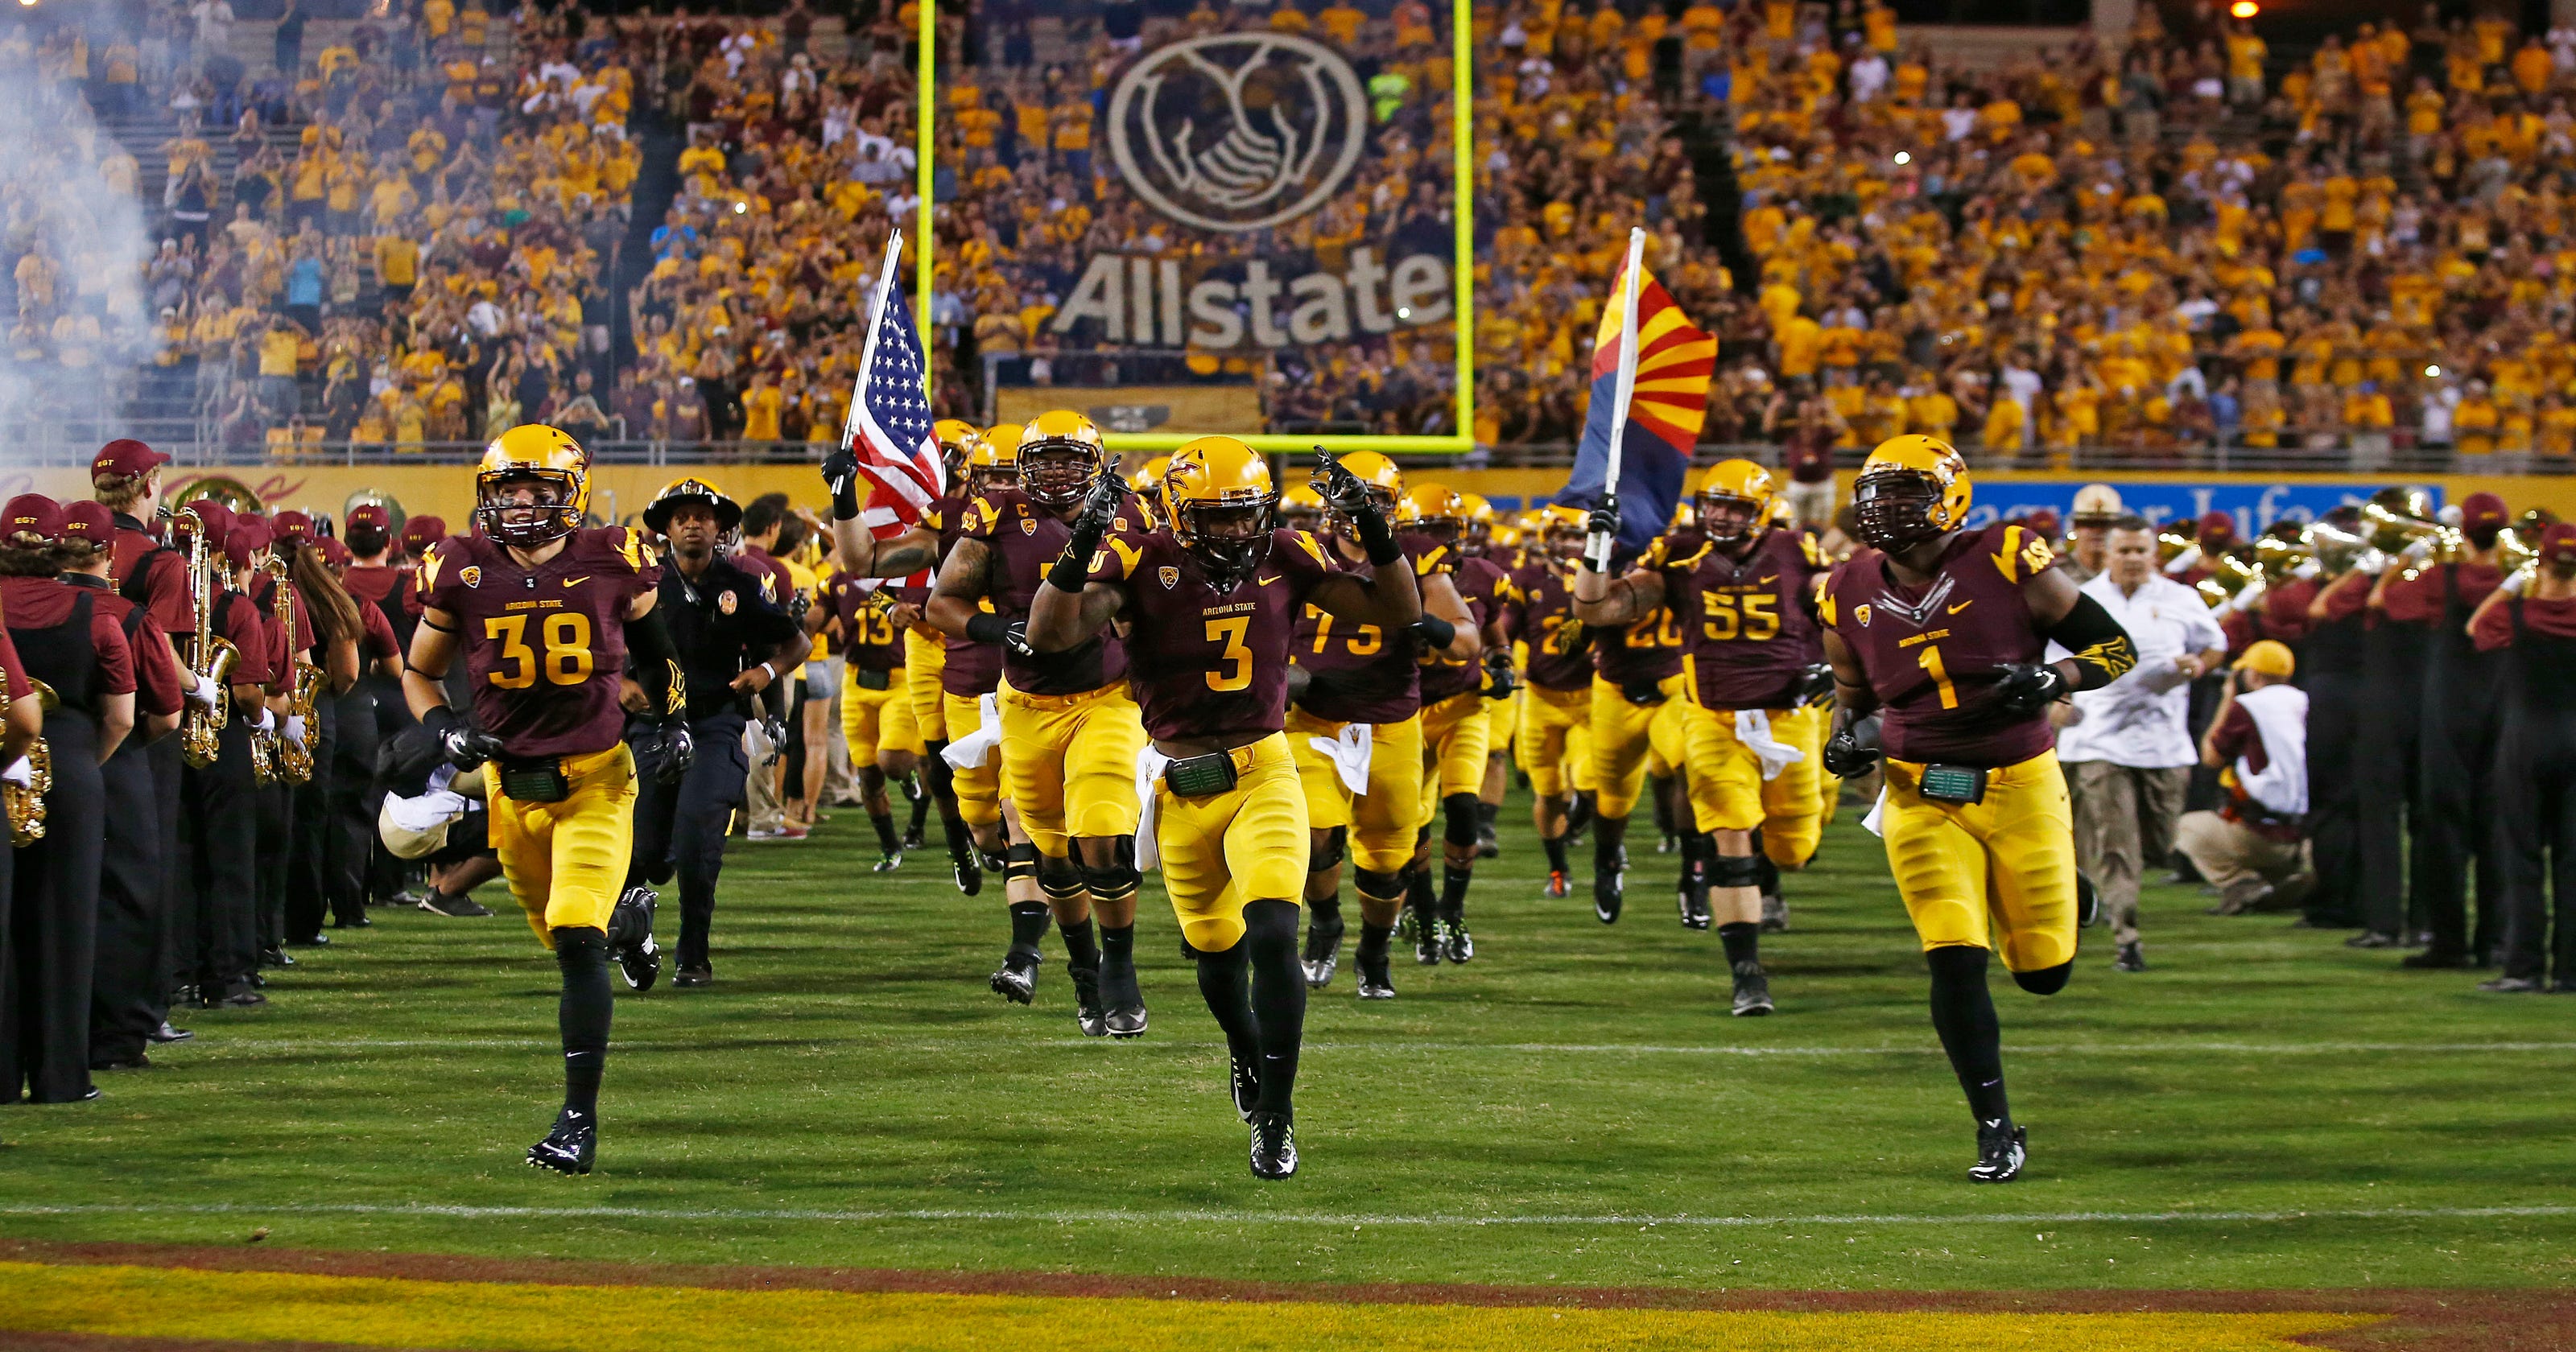 ASU football moves up 2 spots in Amway Coaches Poll